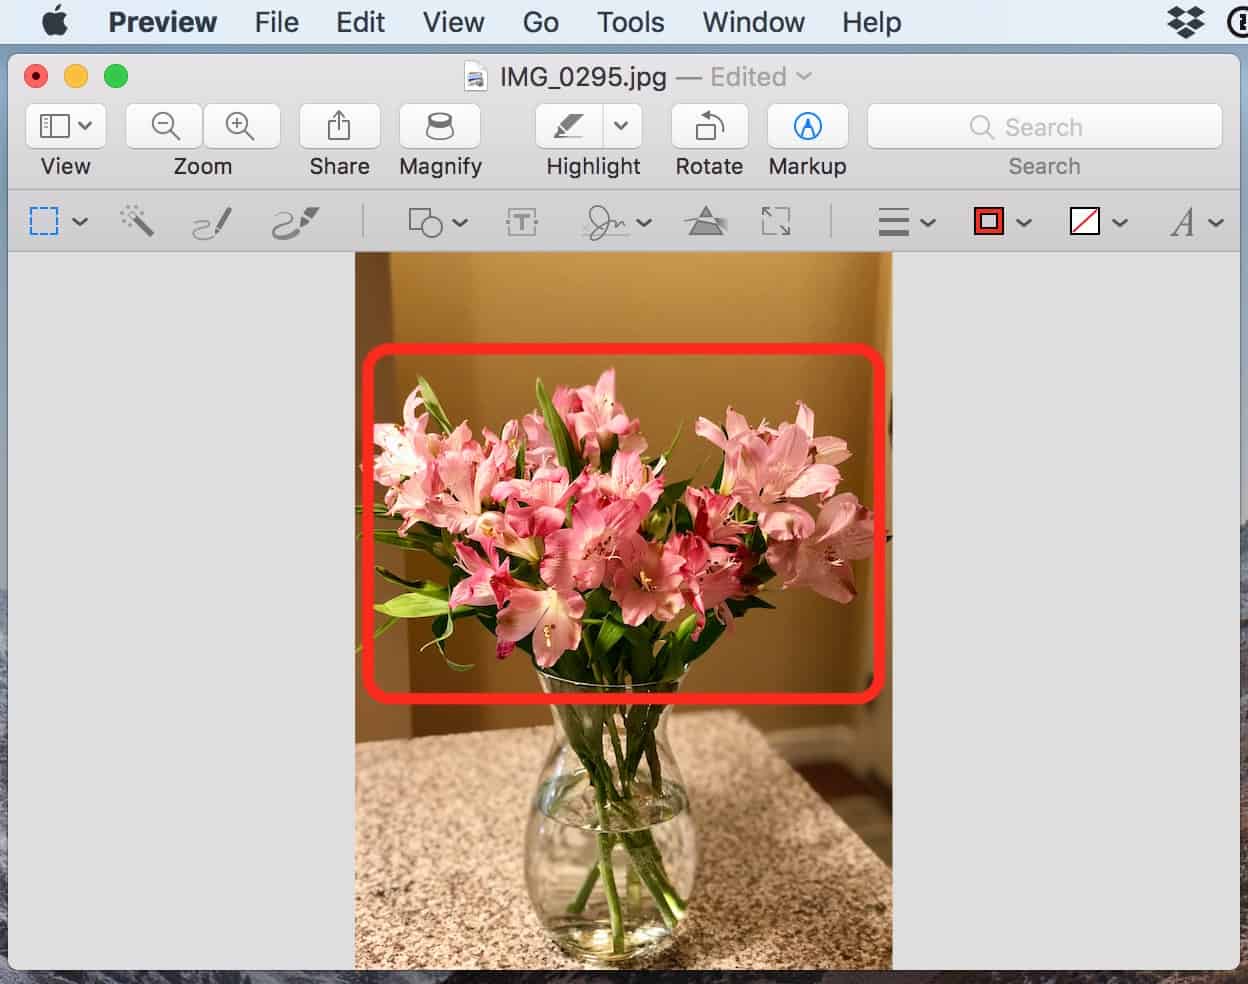 Editing in an image in Preview